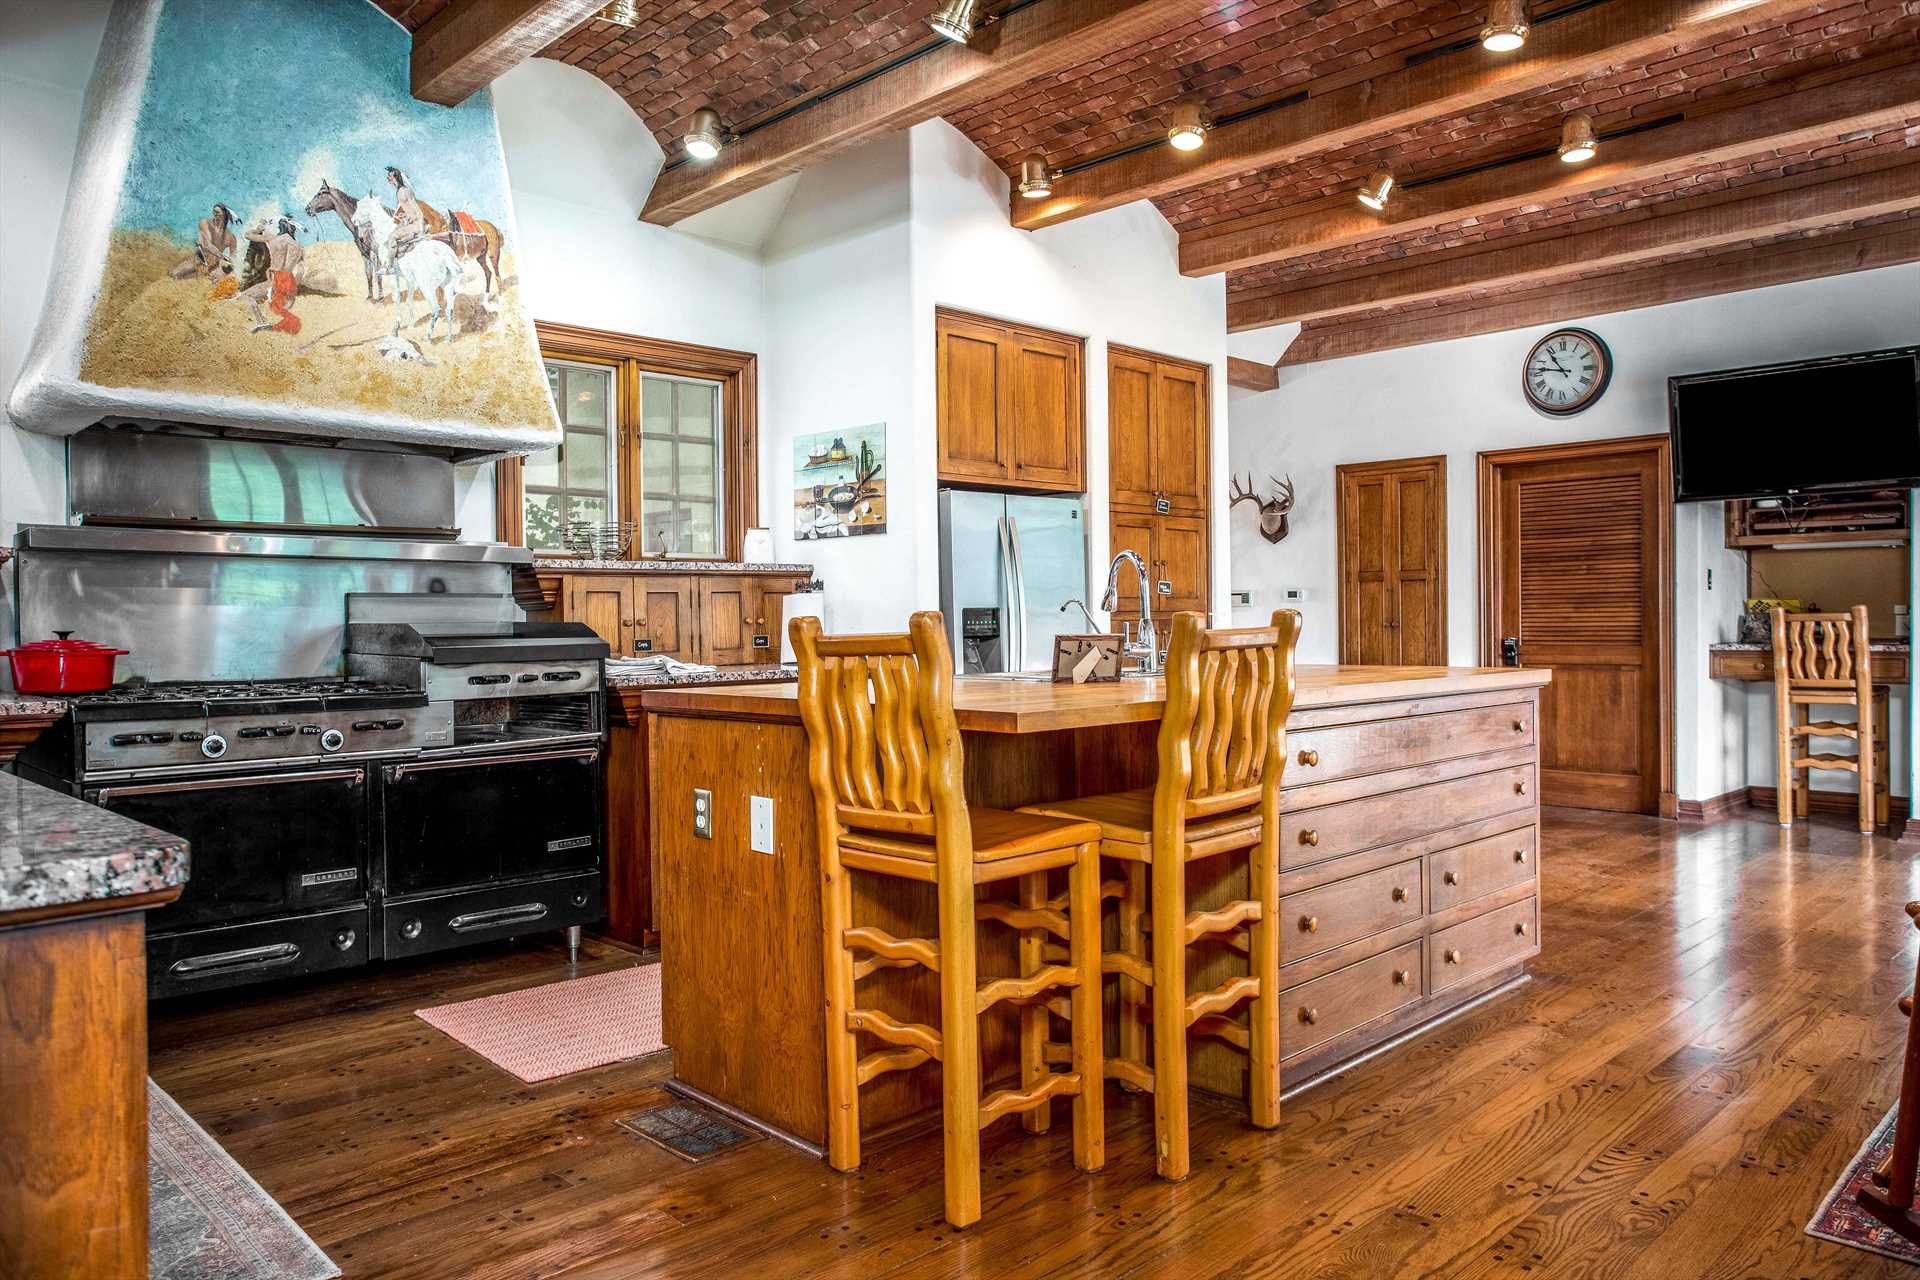                                                 A commercial-grade oven and stove top are crowned by a beautiful southwestern mural and grand and stately beamed ceilings!